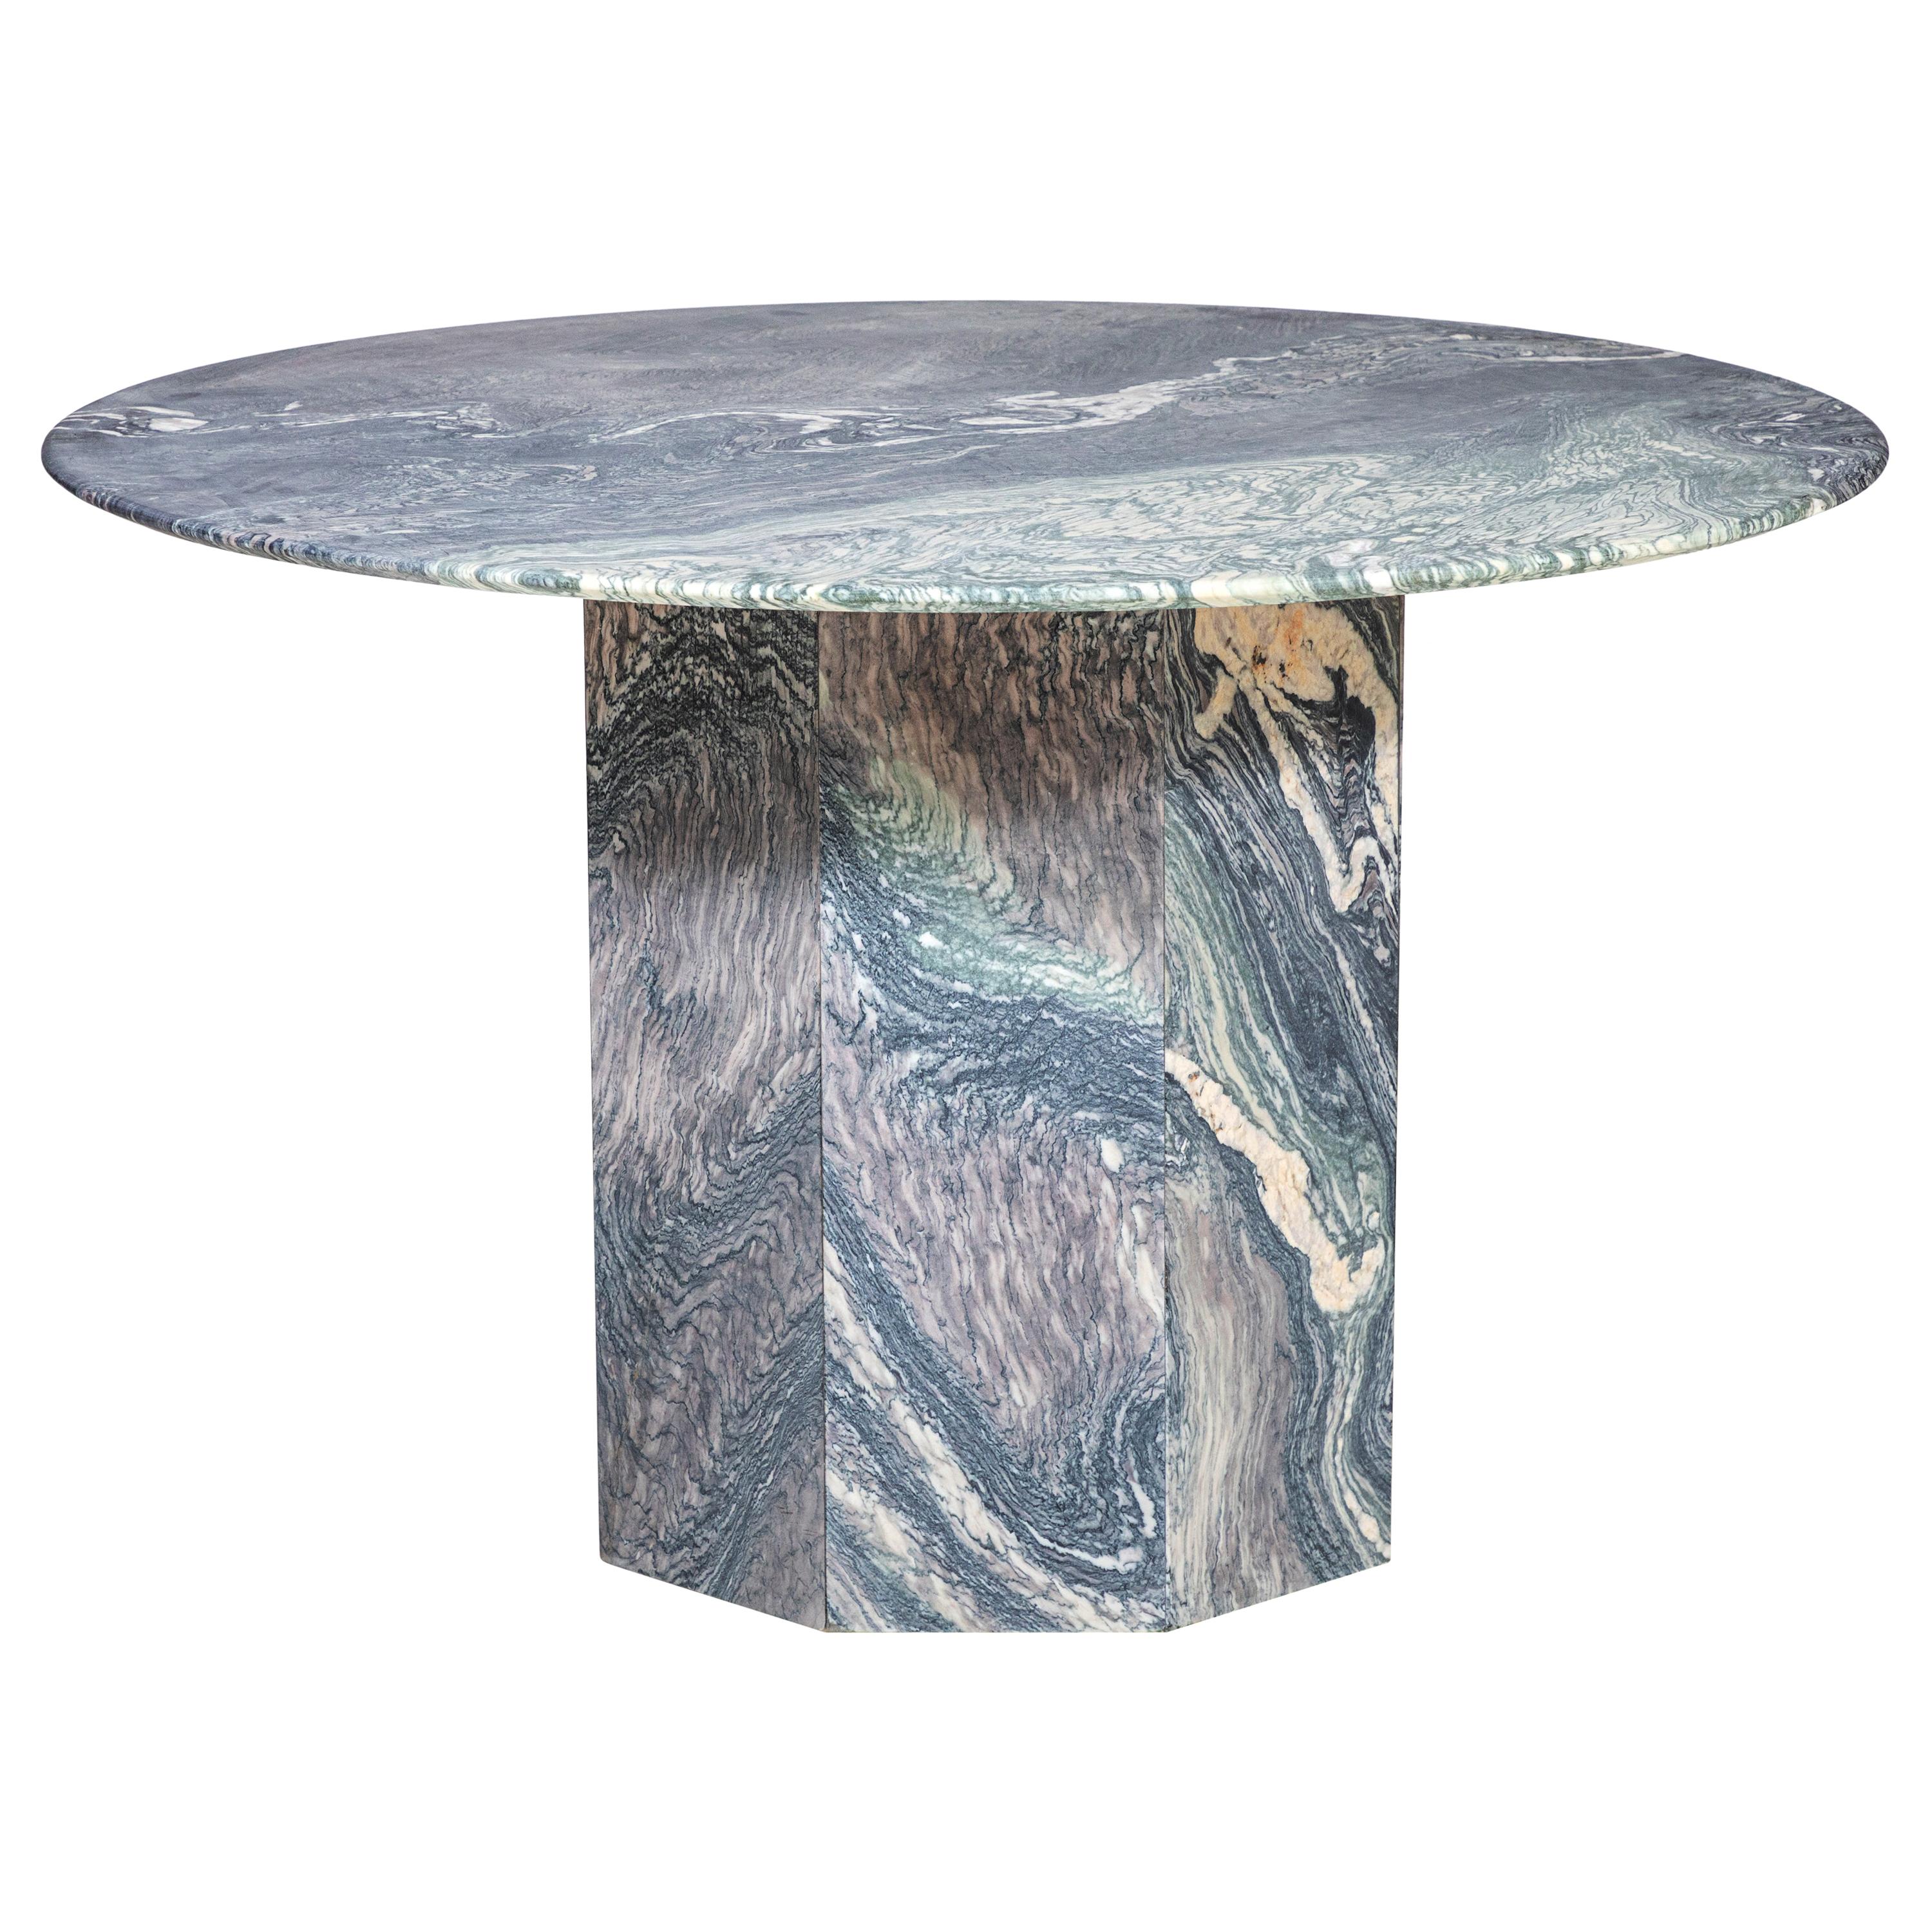 Round Marble Table with Pedestal Base